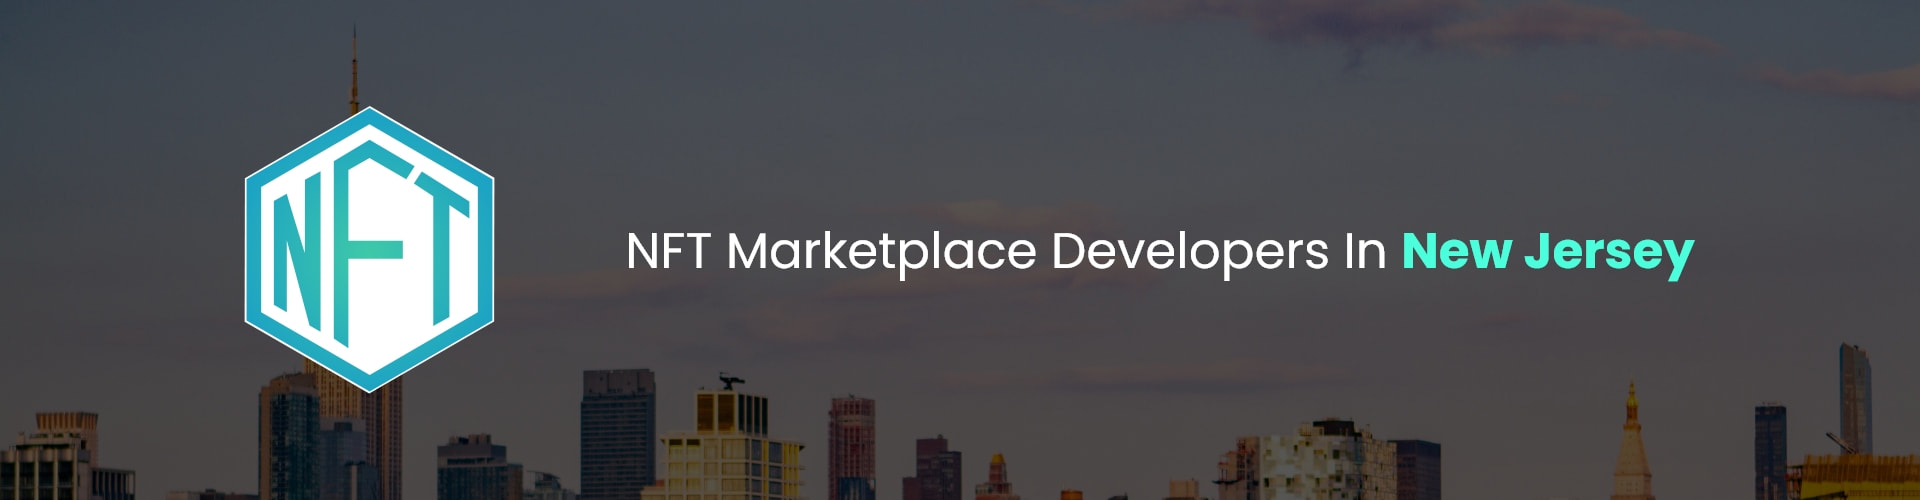 hire nft marketplace developers in new jersey